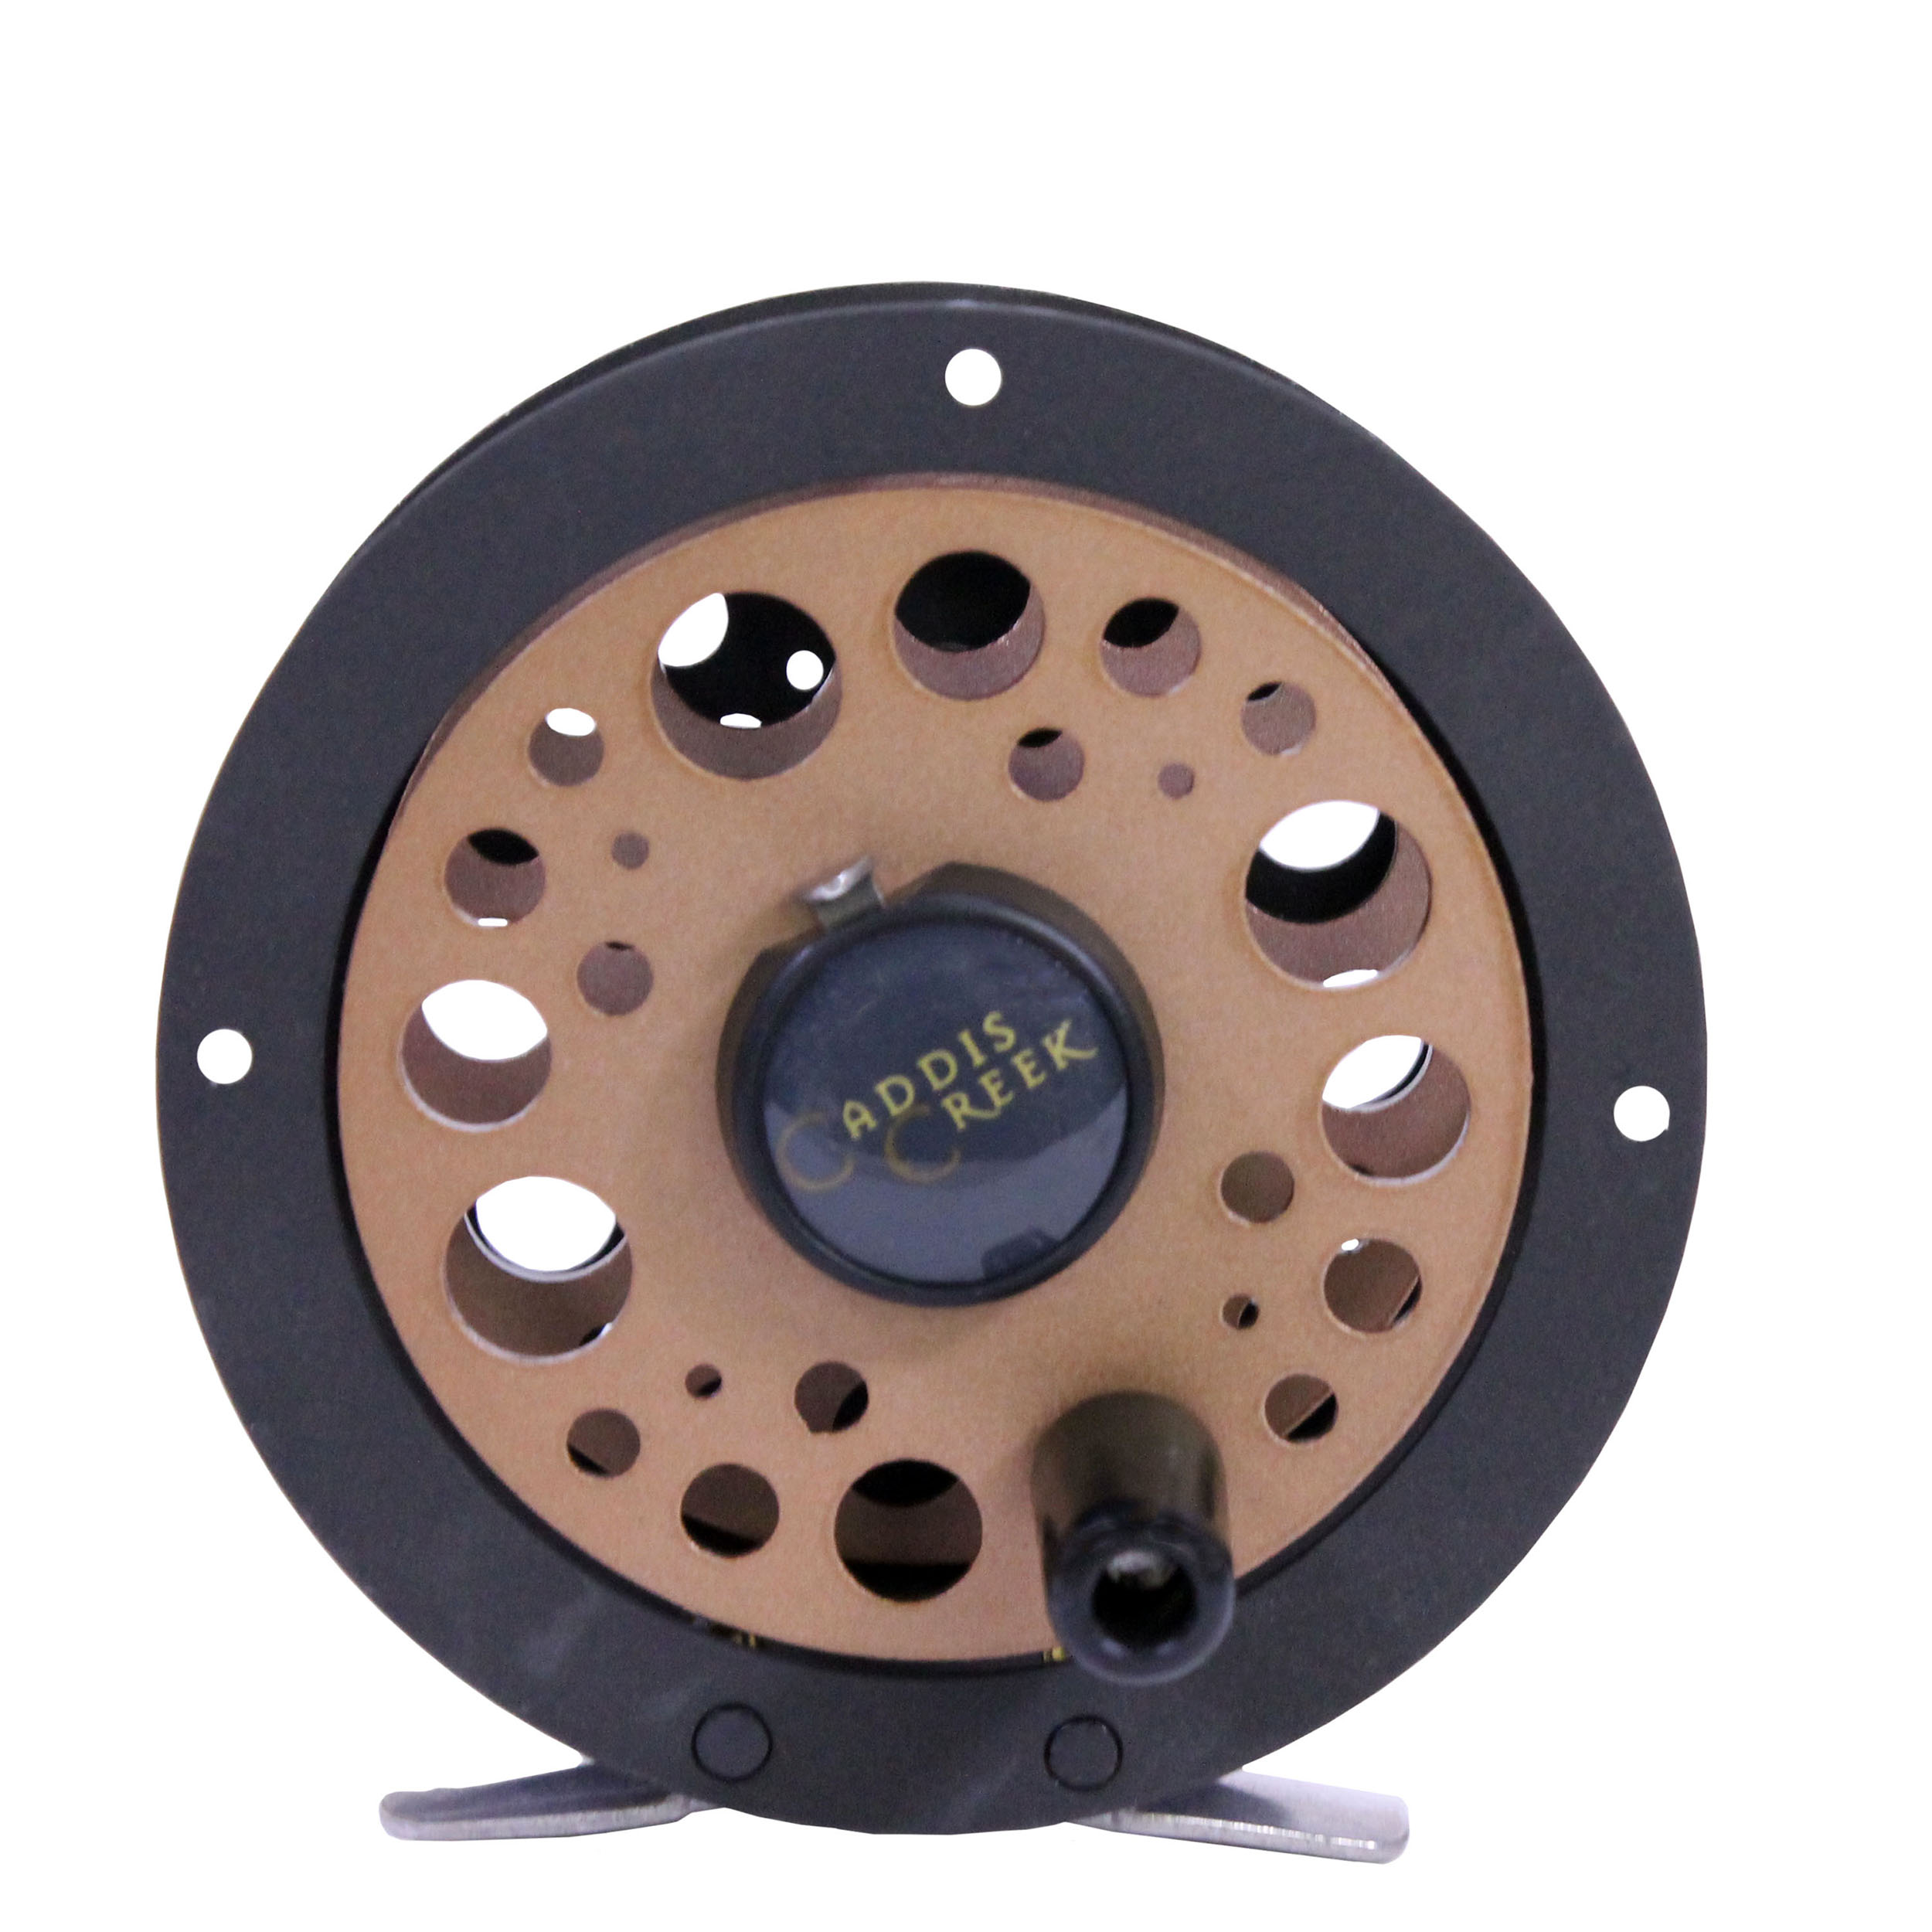  Martin Caddis Creek Fly Fishing Reel, Size 6/5 Single Action Fly  Reel with Rim-Control, Changeable Right- or Left-Hand Retrieve, Lightweight  Aluminum Spool, Brown, 63 : Sports & Outdoors